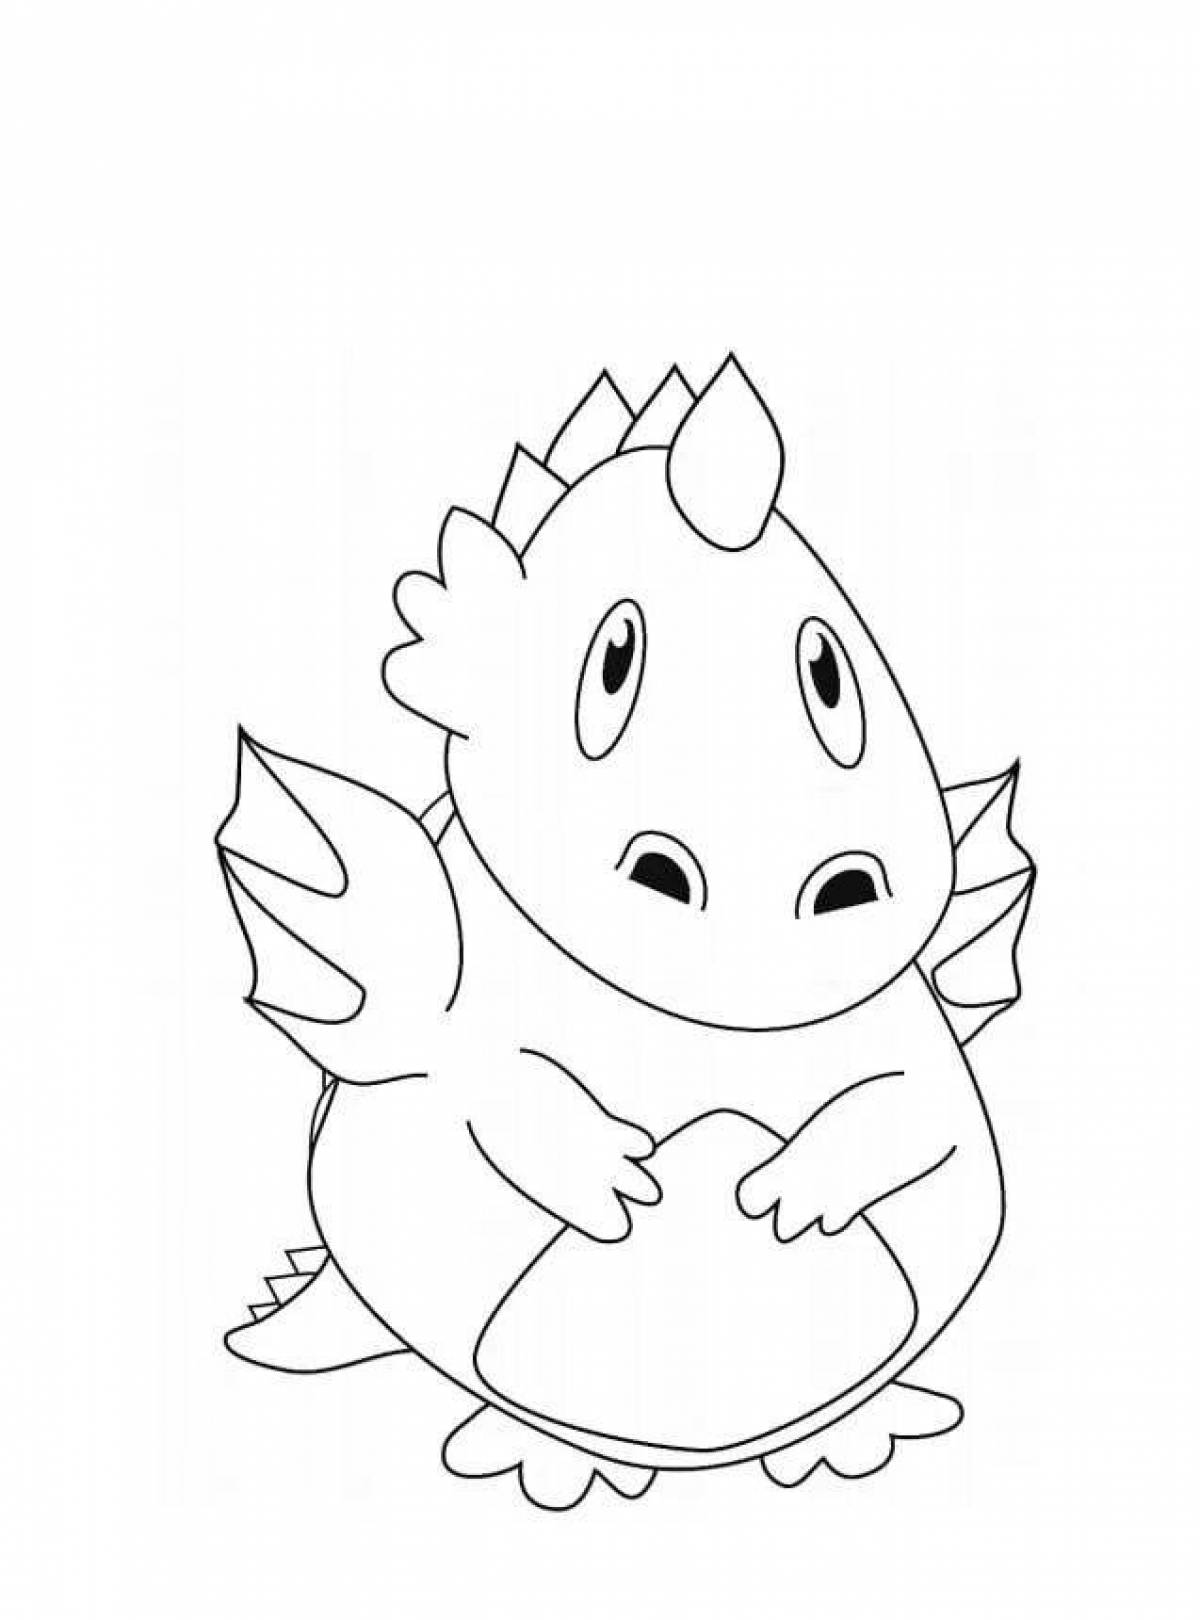 Coloring dragons for kids